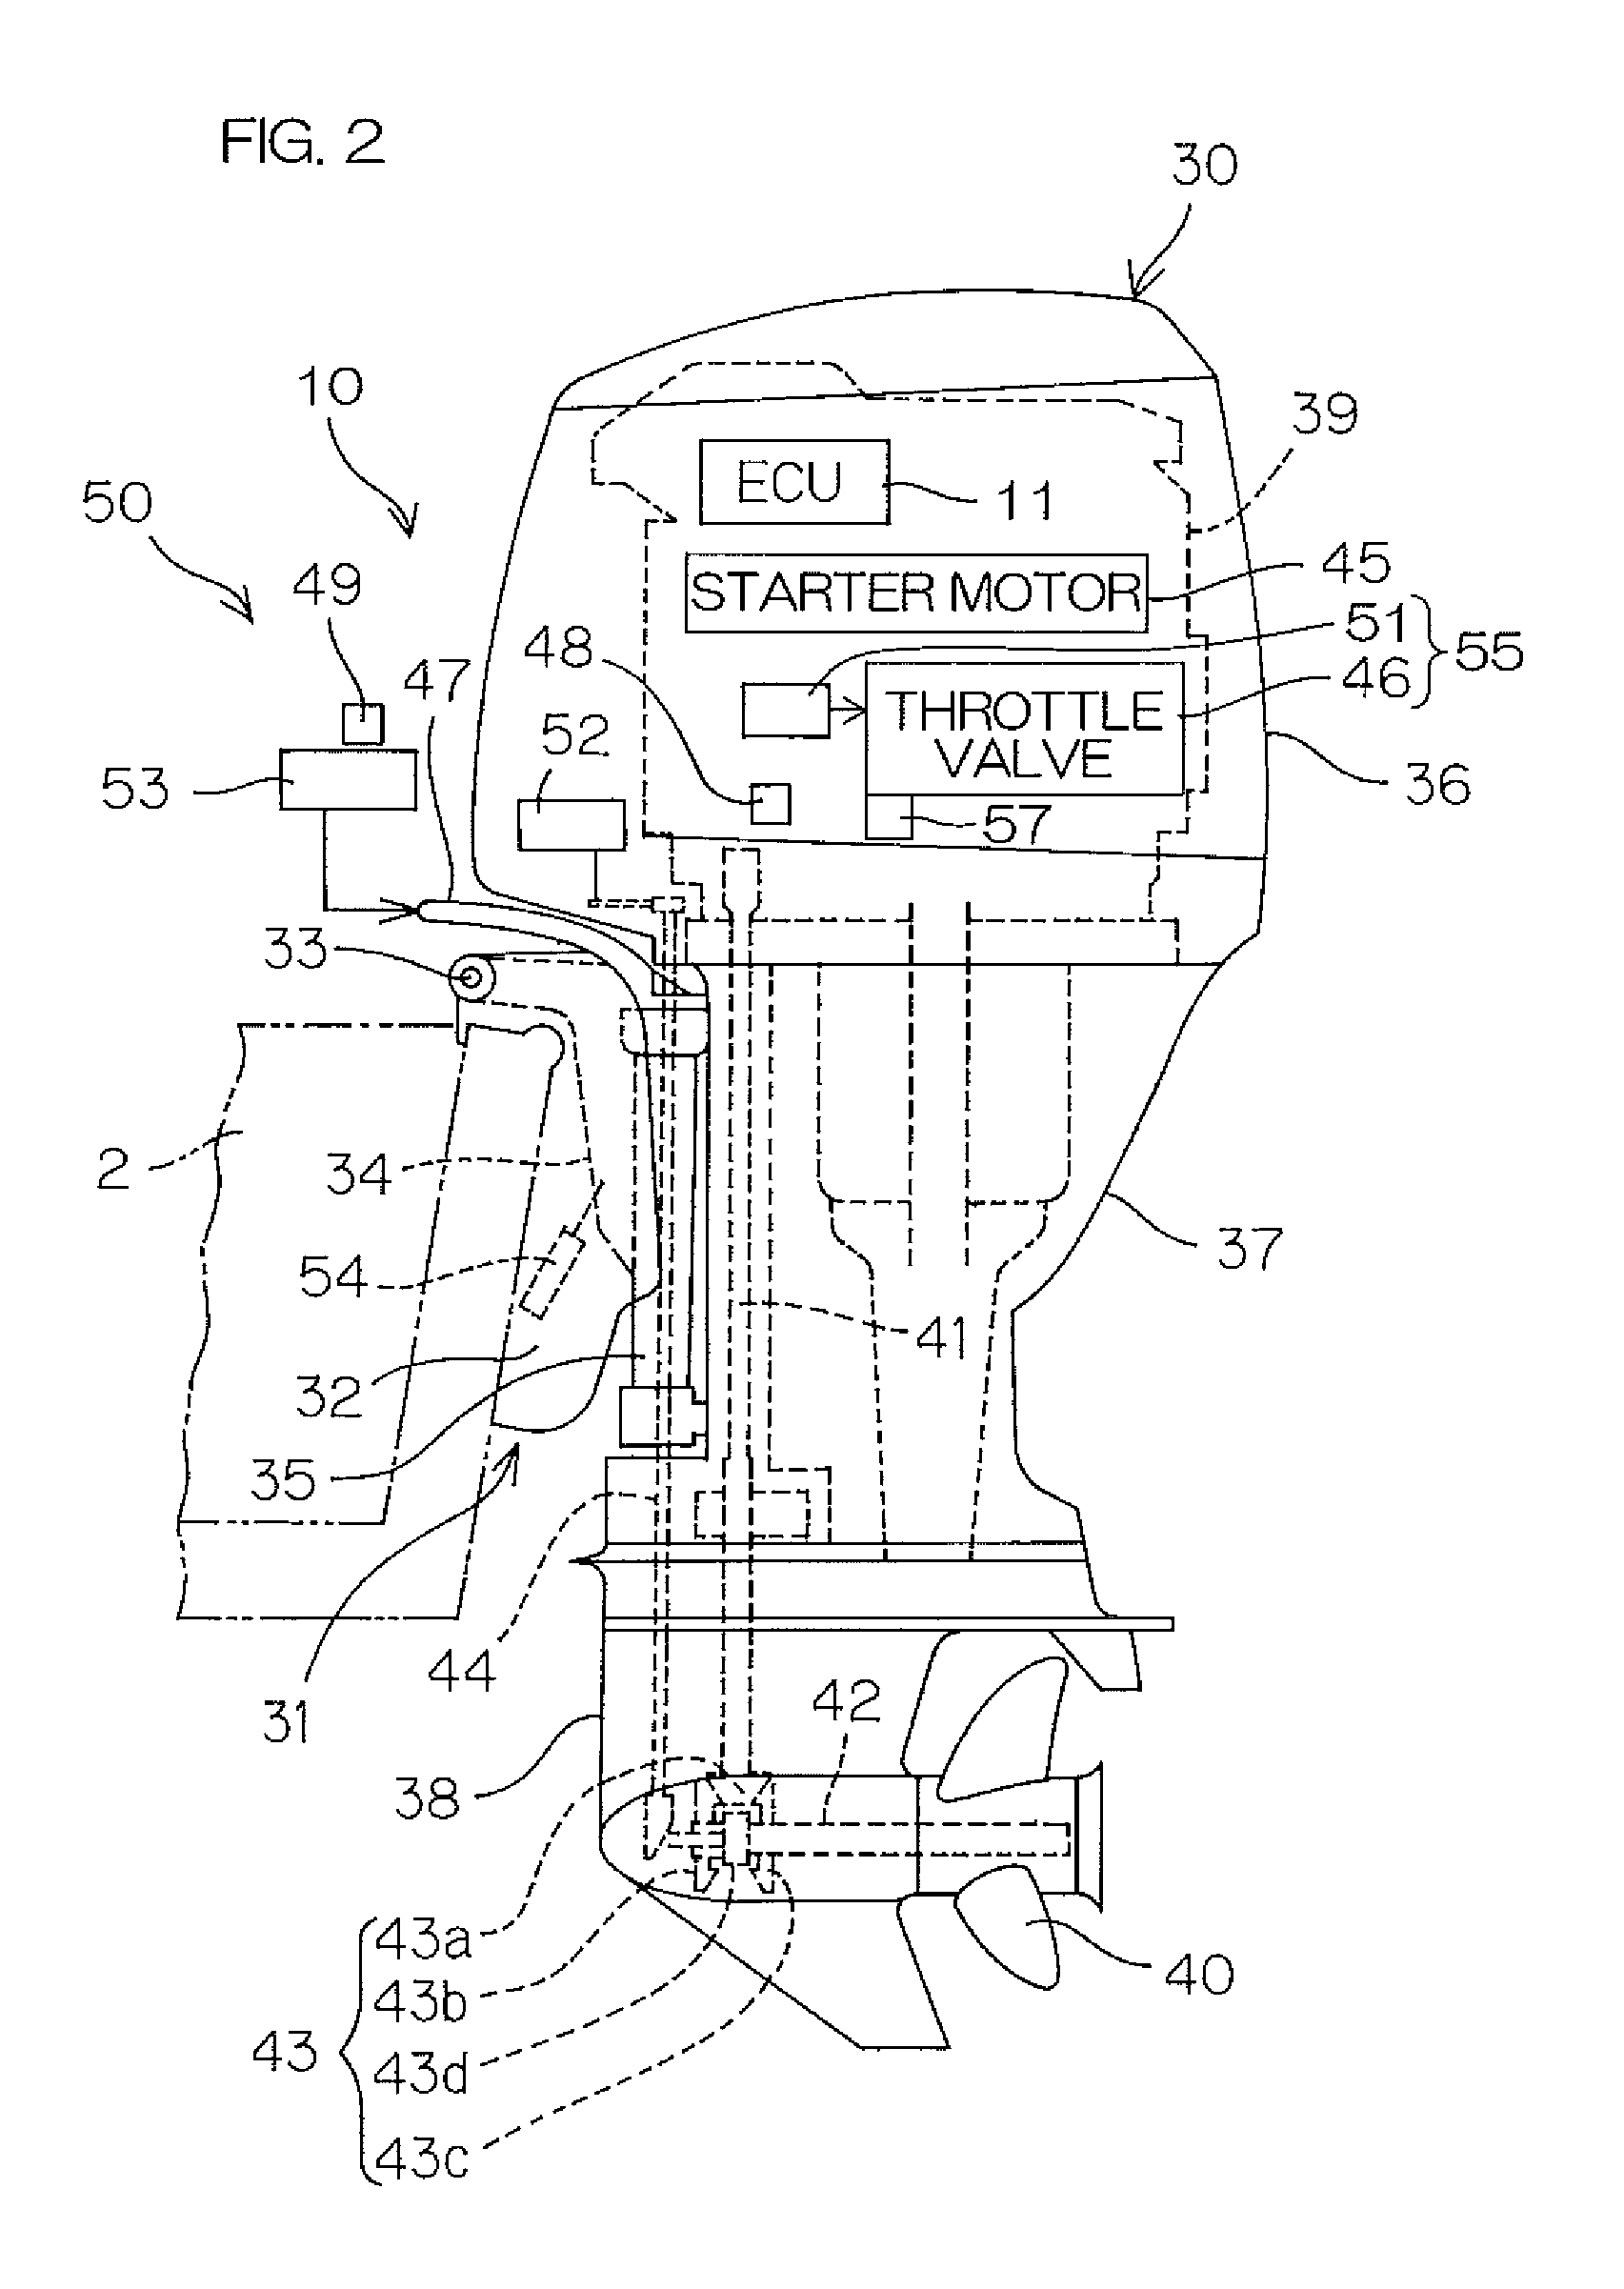 Marine vessel running controlling apparatus, and marine vessel including the same